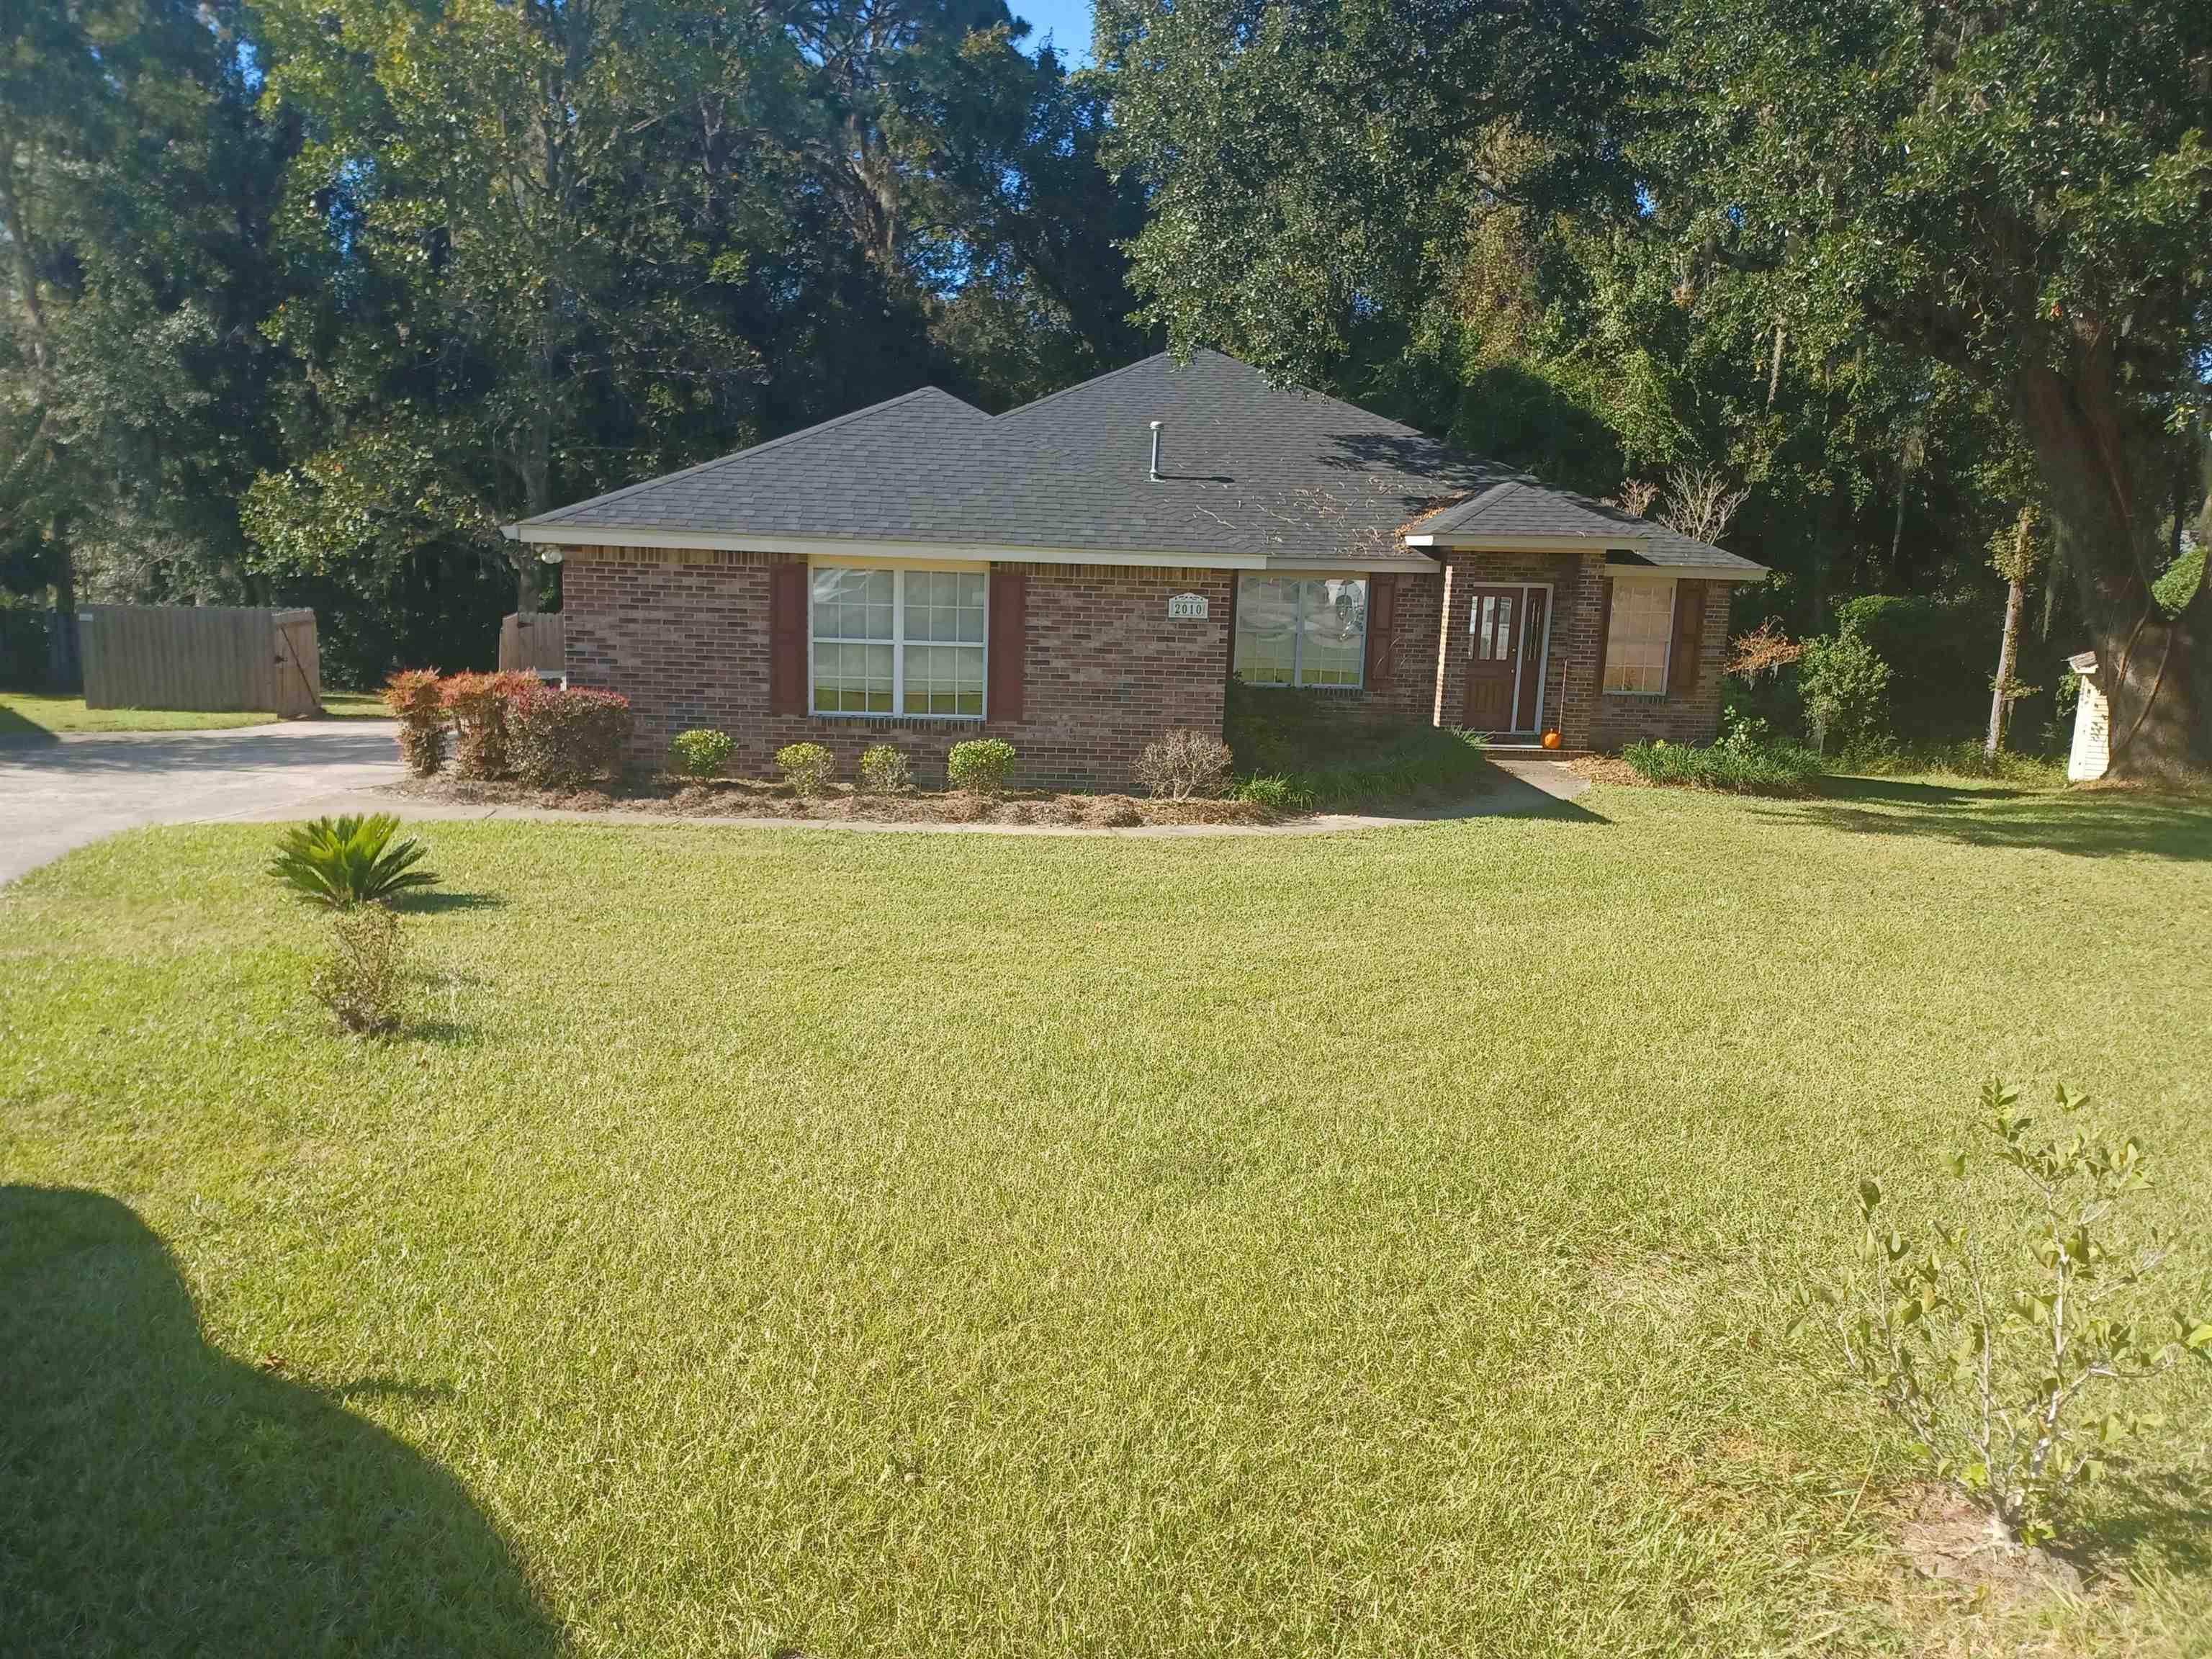 2010 Indian Springs Ct.,TALLAHASSEE,Florida 32303,4 Bedrooms Bedrooms,2 BathroomsBathrooms,Detached single family,2010 Indian Springs Ct.,364846